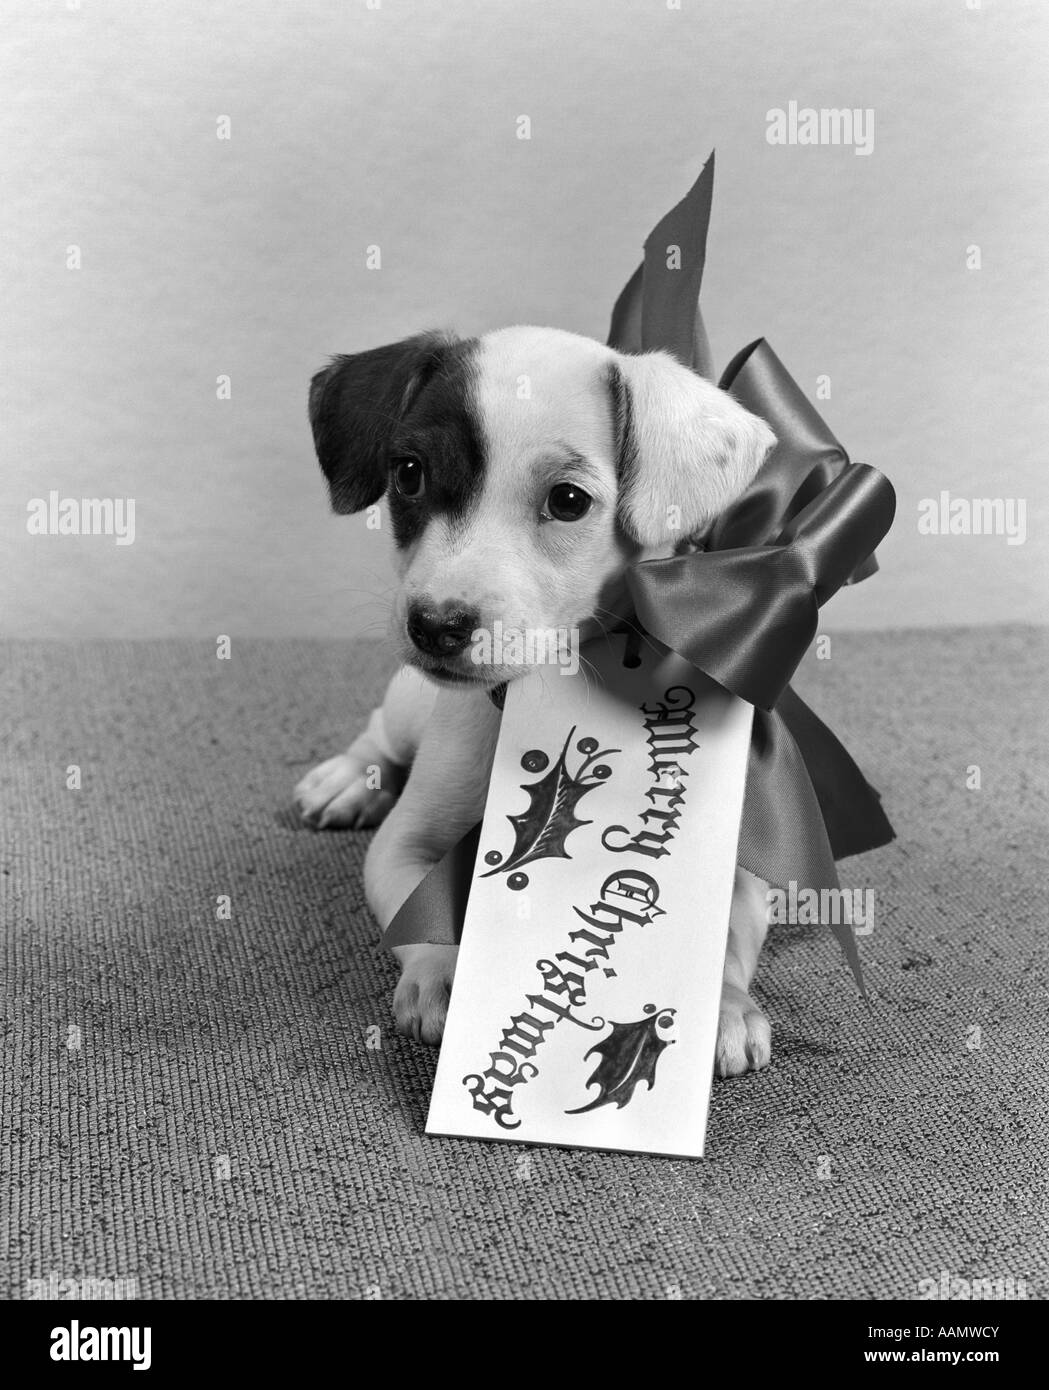 1940s CUTE GIFT PUPPY MERRY CHRISTMAS BOW AND TAG Stock Photo